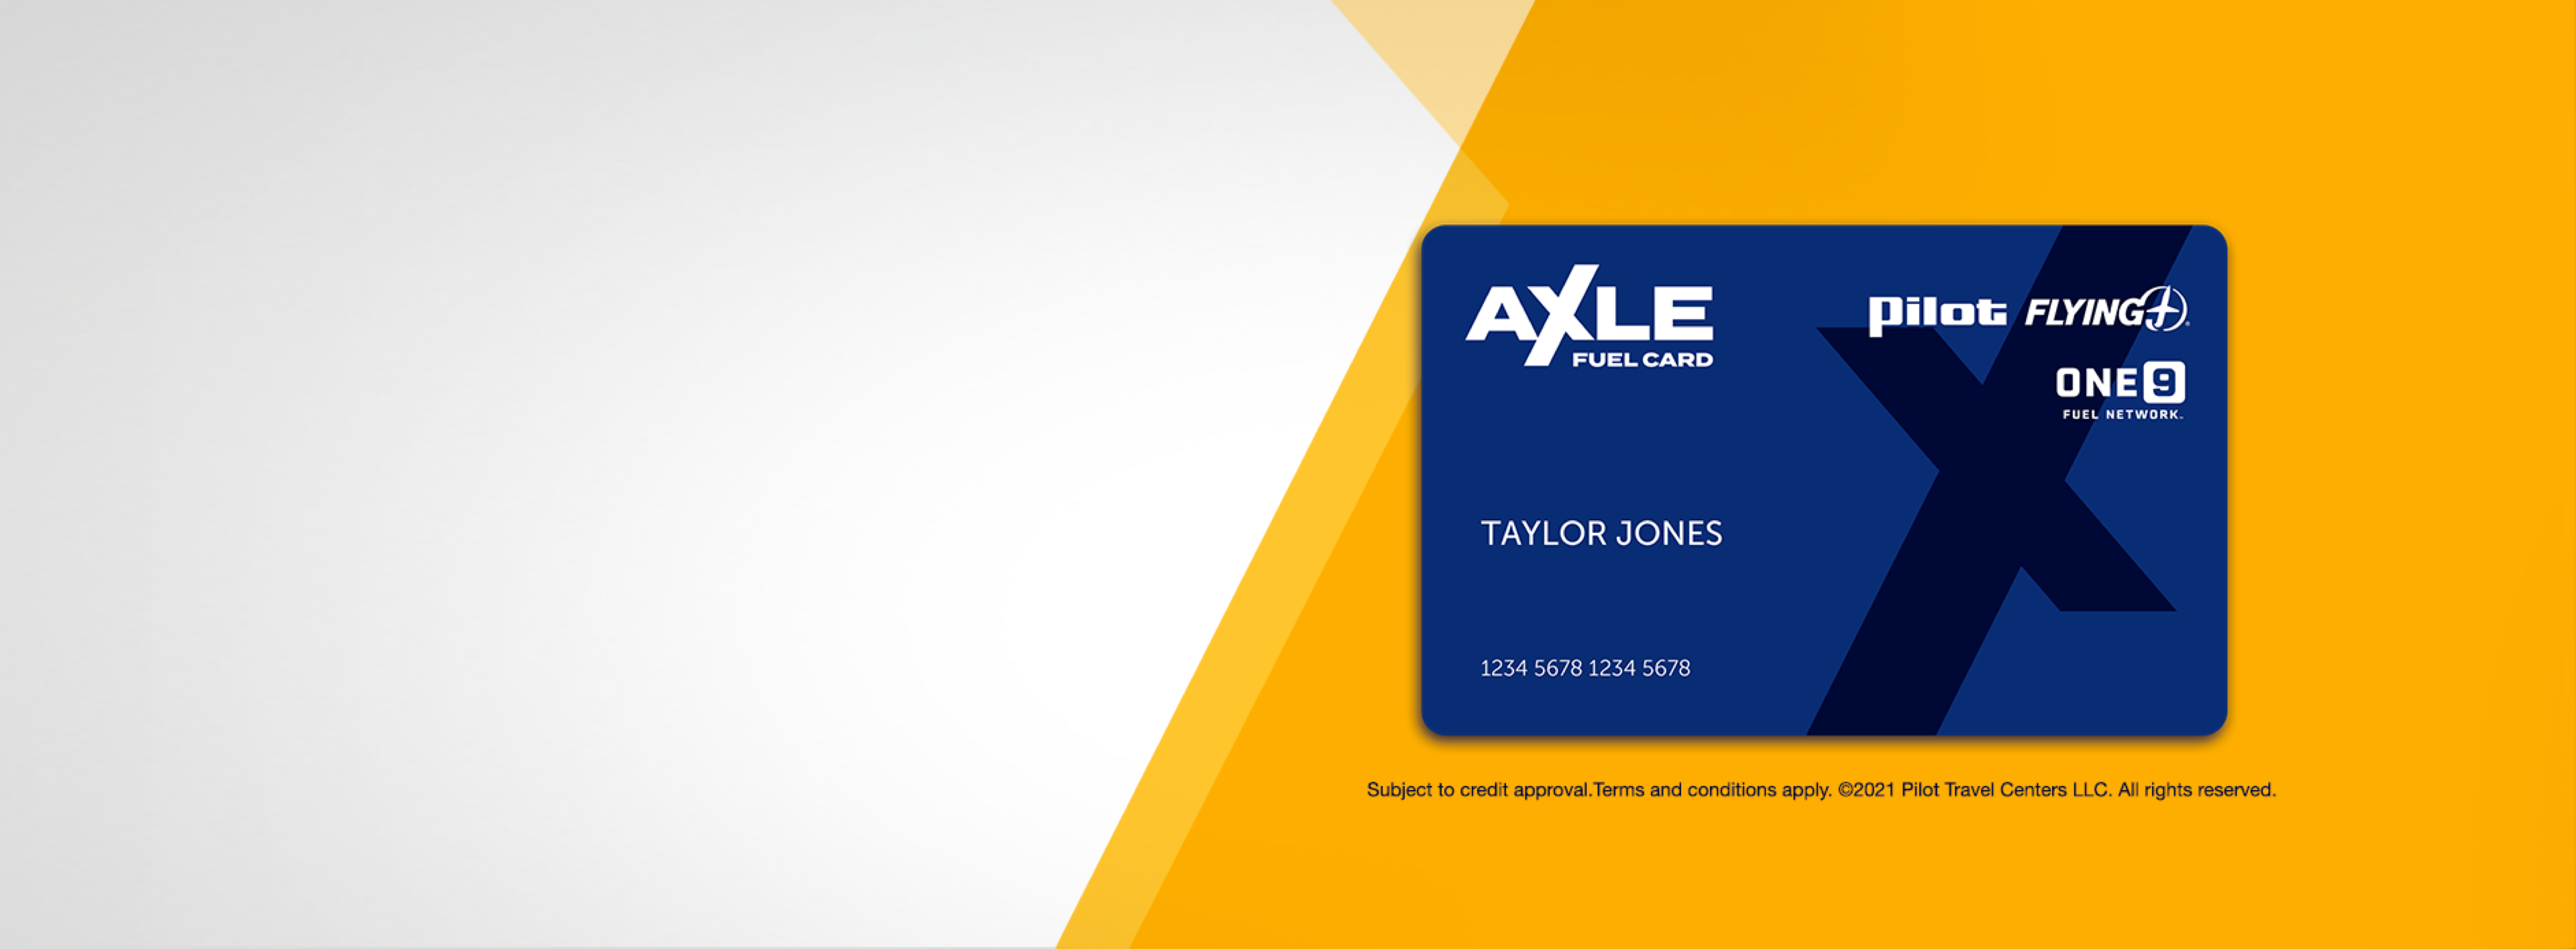 Blue Axle Fuel Card with white and yellow background